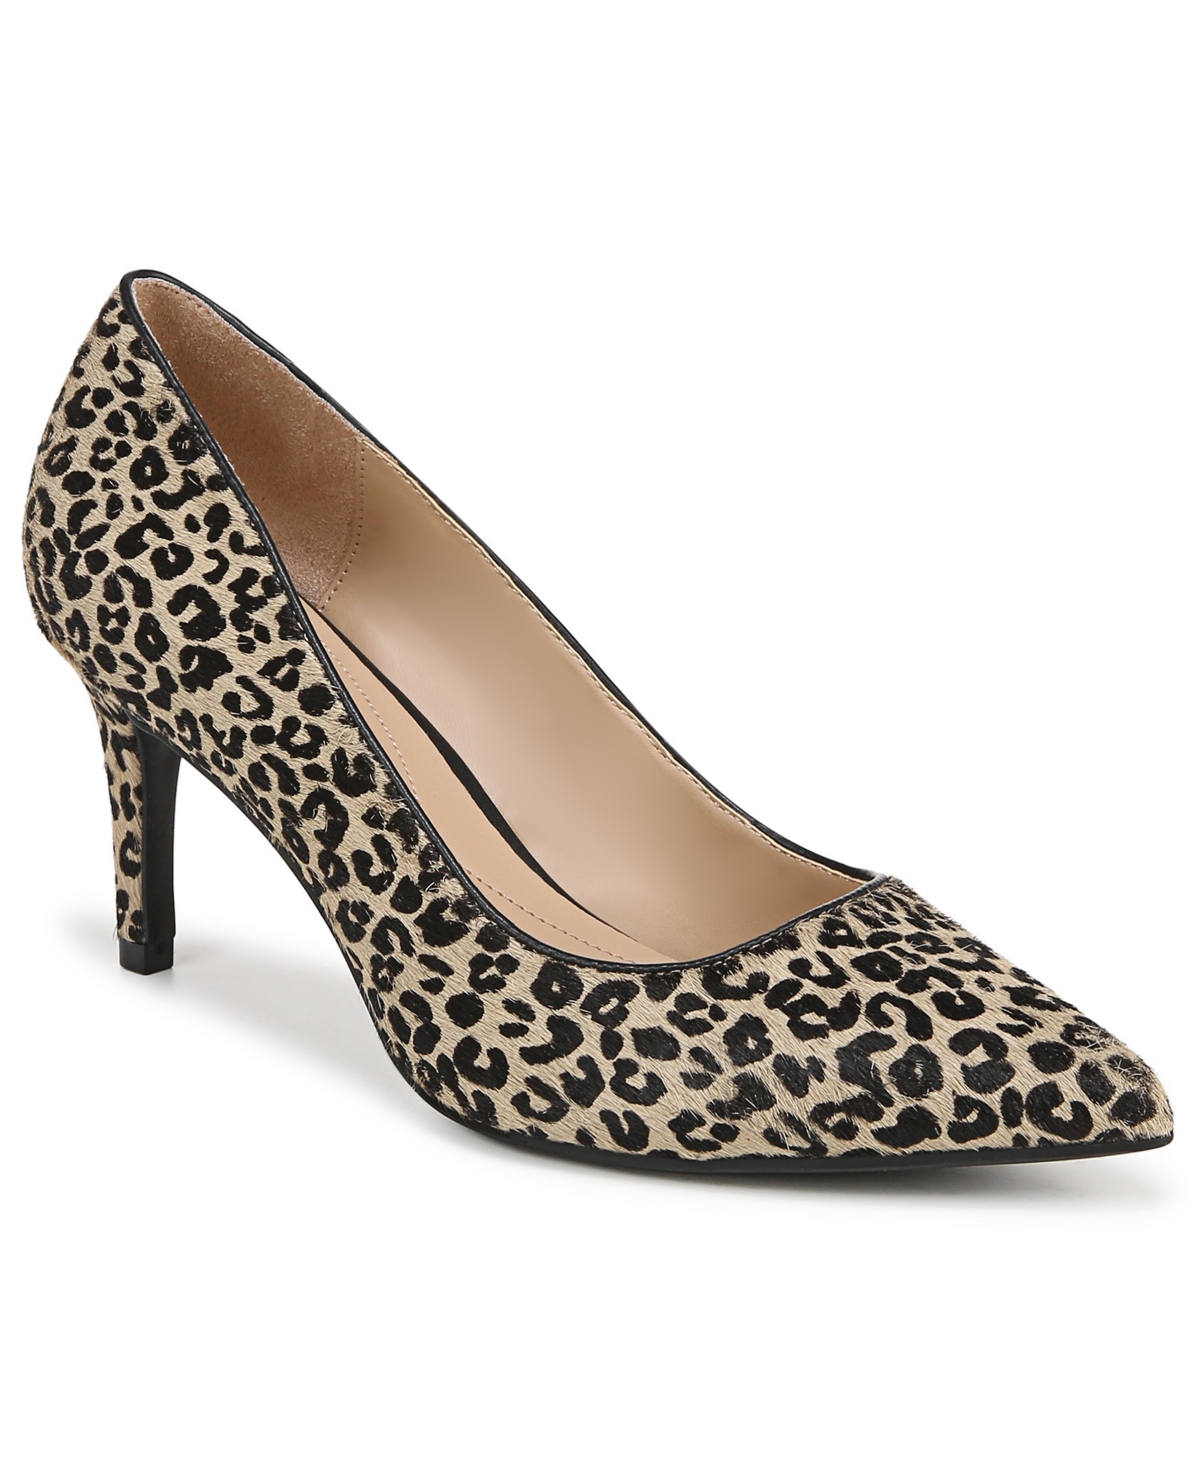 Women's Jeules Pointed-Toe Slip-On Pumps, Created for Macy's - Leopard Haircalf